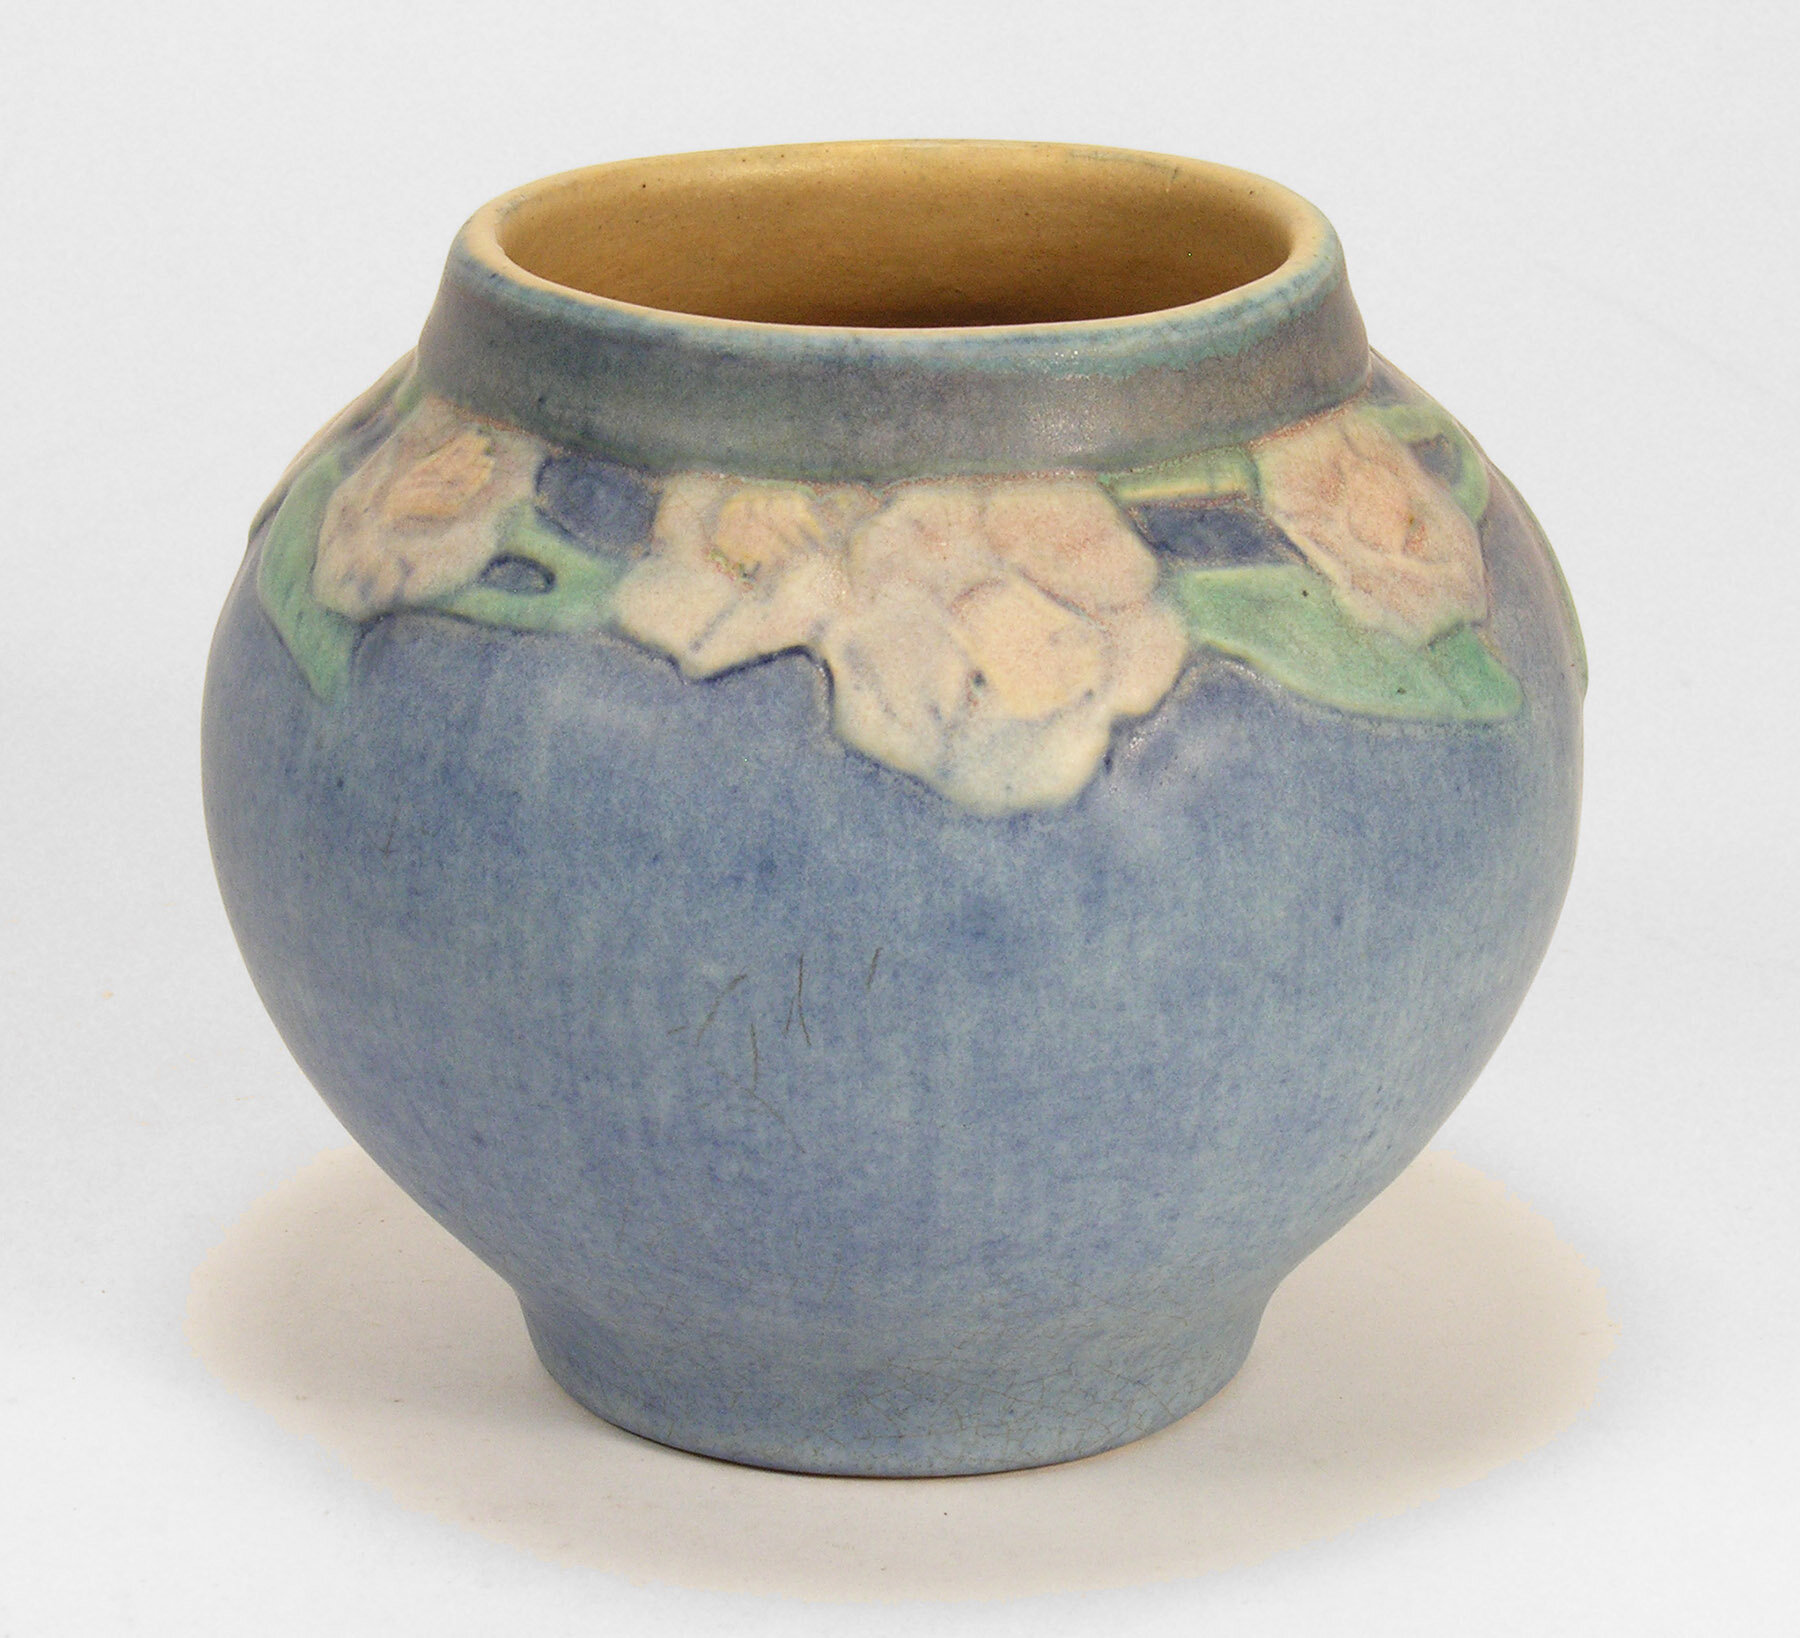 Dating Newcomb Pottery